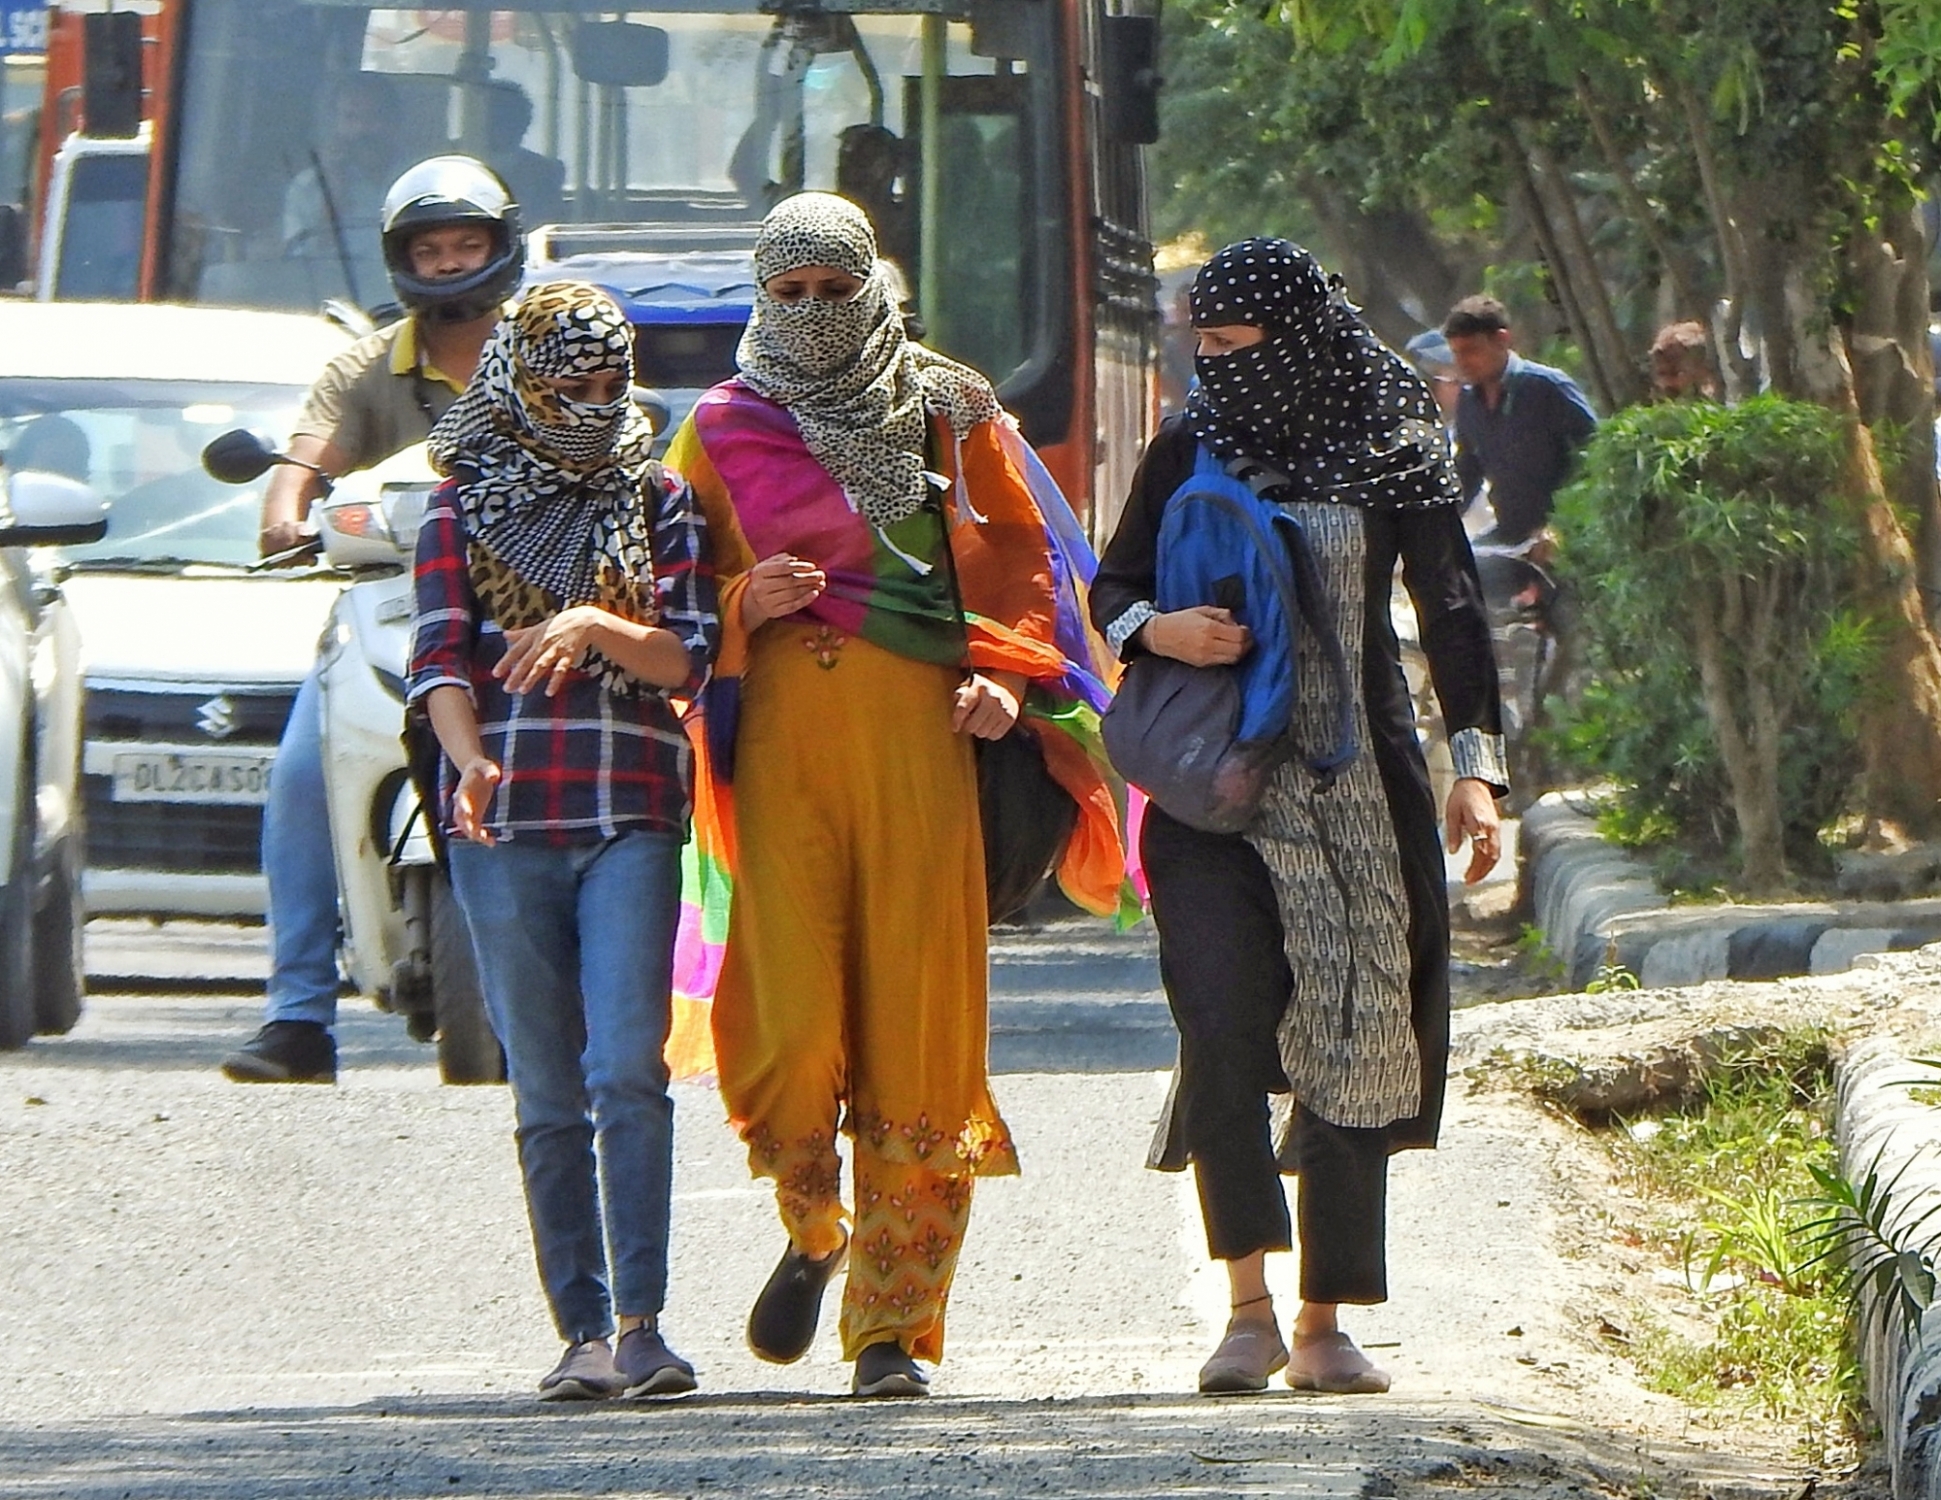 Delhi’s Najafgarh records 46 degrees C for second consecutive day, respite likely soon